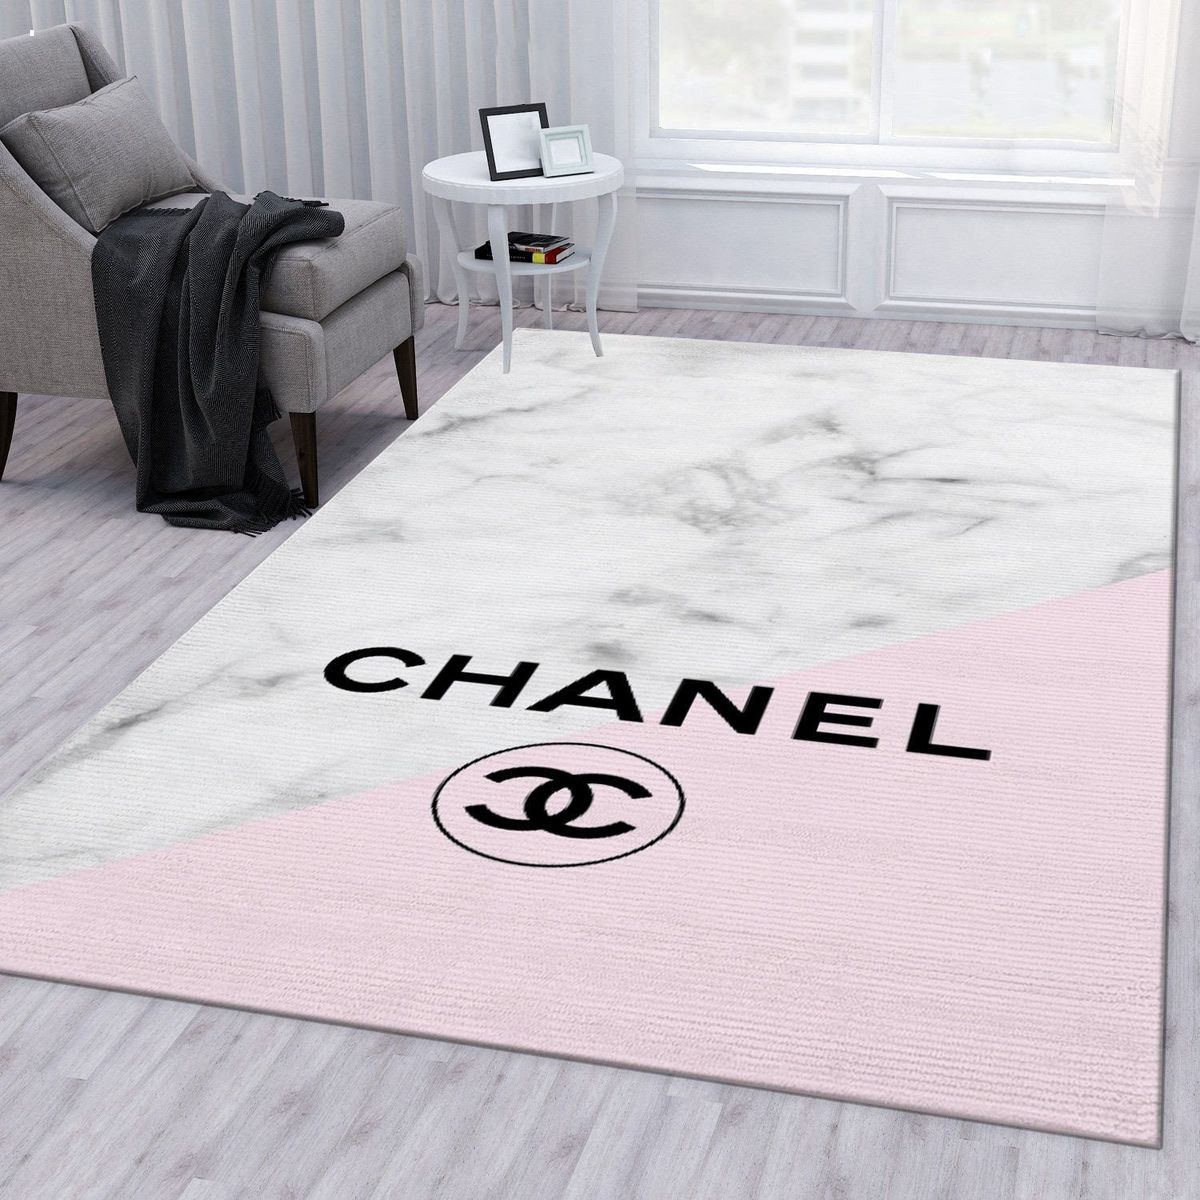 Chanel White Pink Luxury Brand Carpet Rug Limited Edition